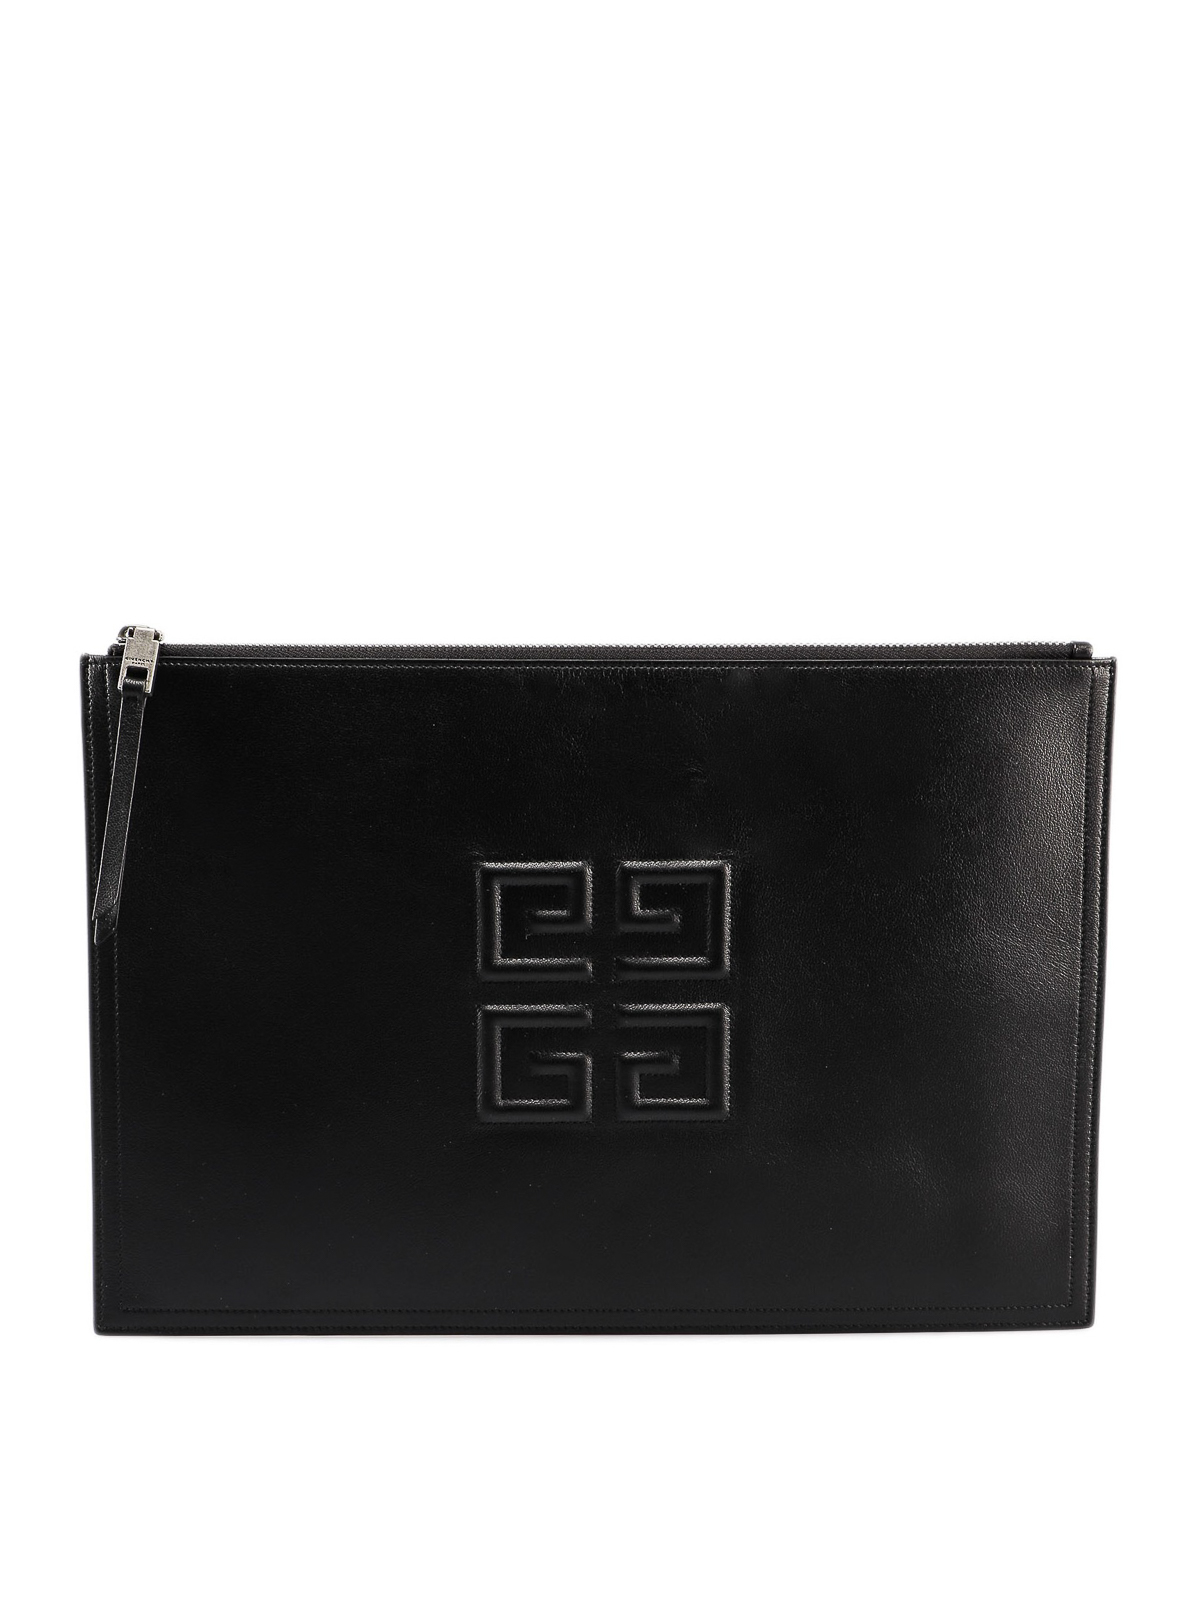 Clutches Givenchy - Emblem large pouch - BB602WB07Y001 | iKRIX.com